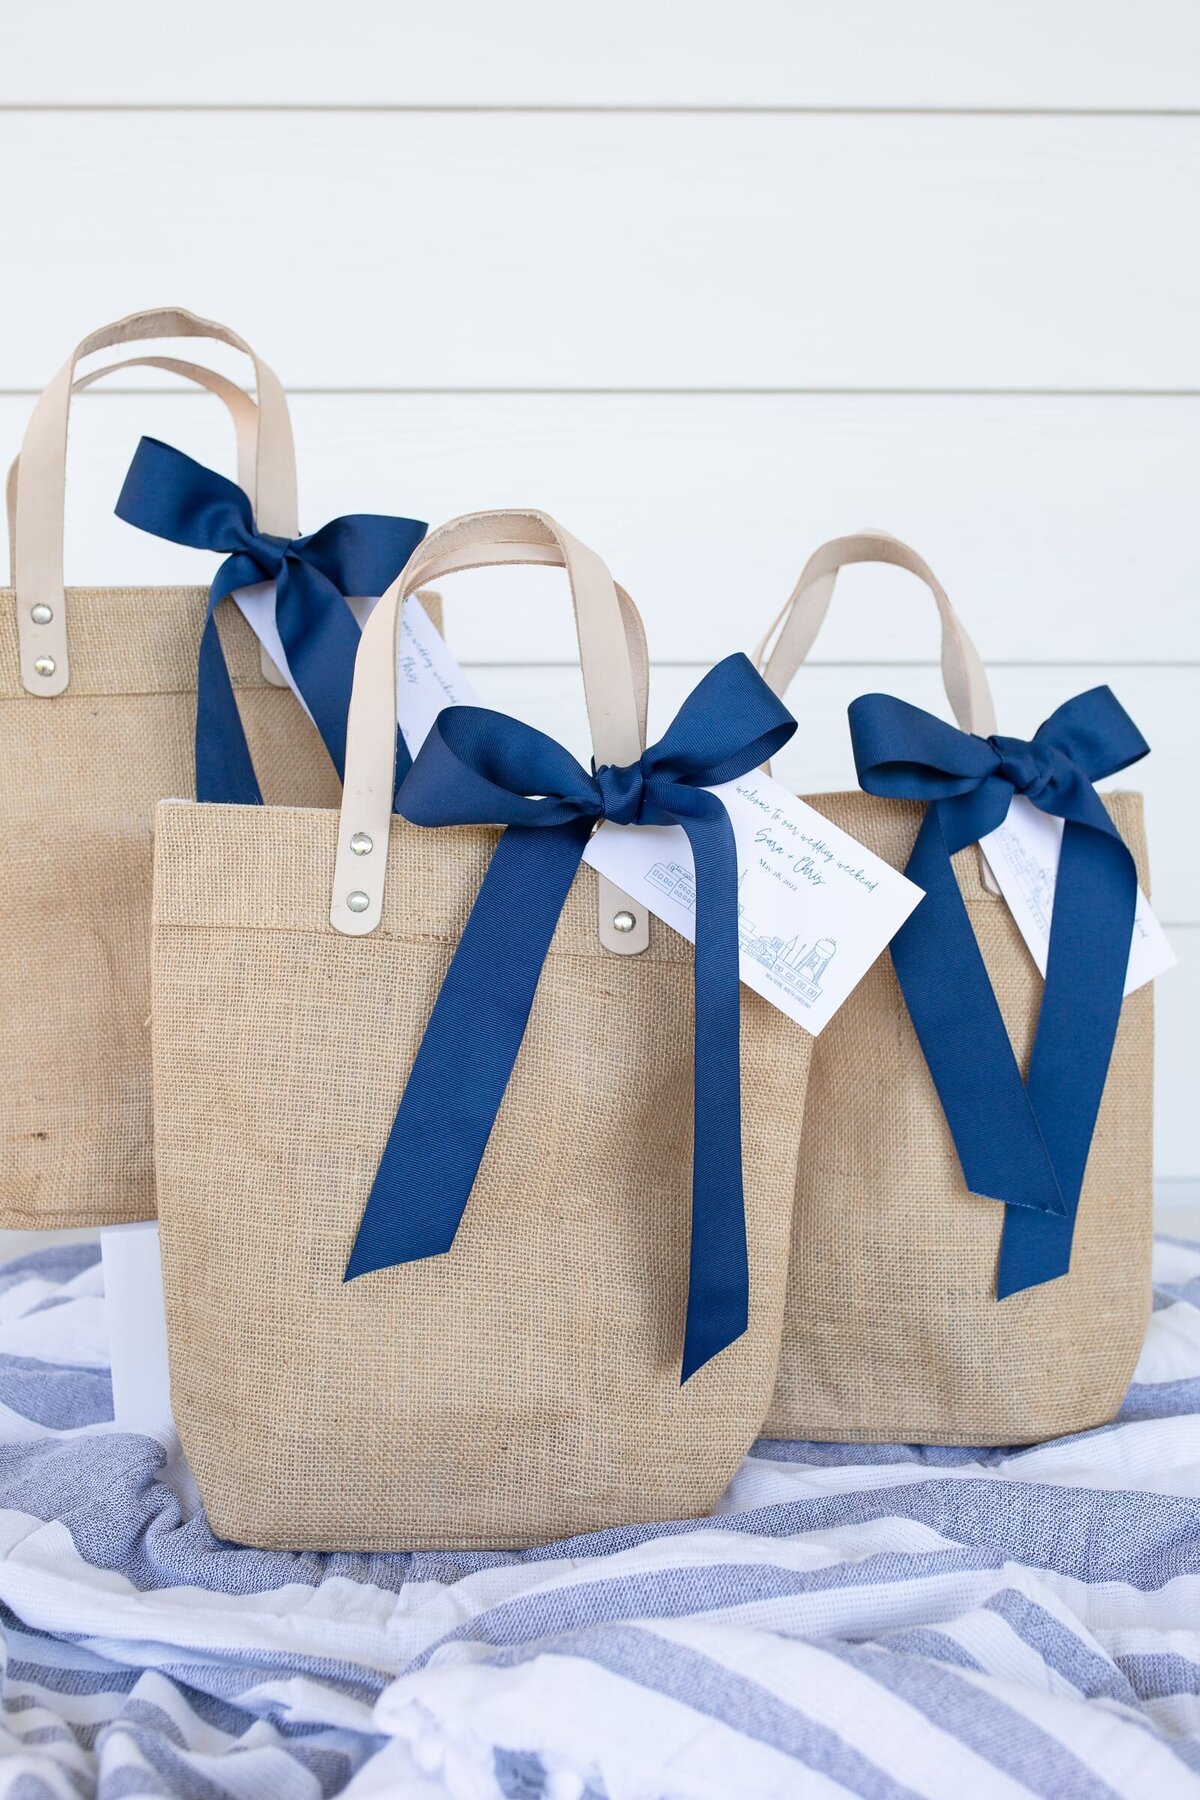 Chapel Hill NC product photographer. Photos of merchendise for website. Tan bags with blue ribbons.